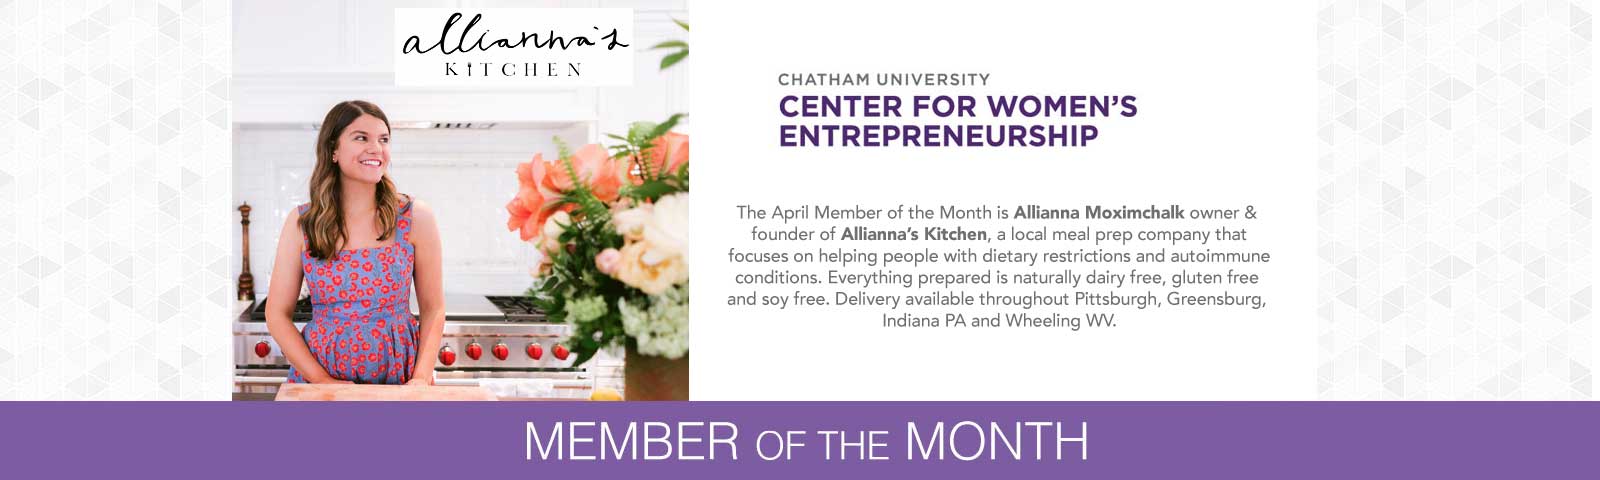 The April Member of the Month is Allianna Moximchalk owner & founder of Allianna’s Kitchen, a local meal prep company that focuses on helping people with dietary restrictions and autoimmune conditions.